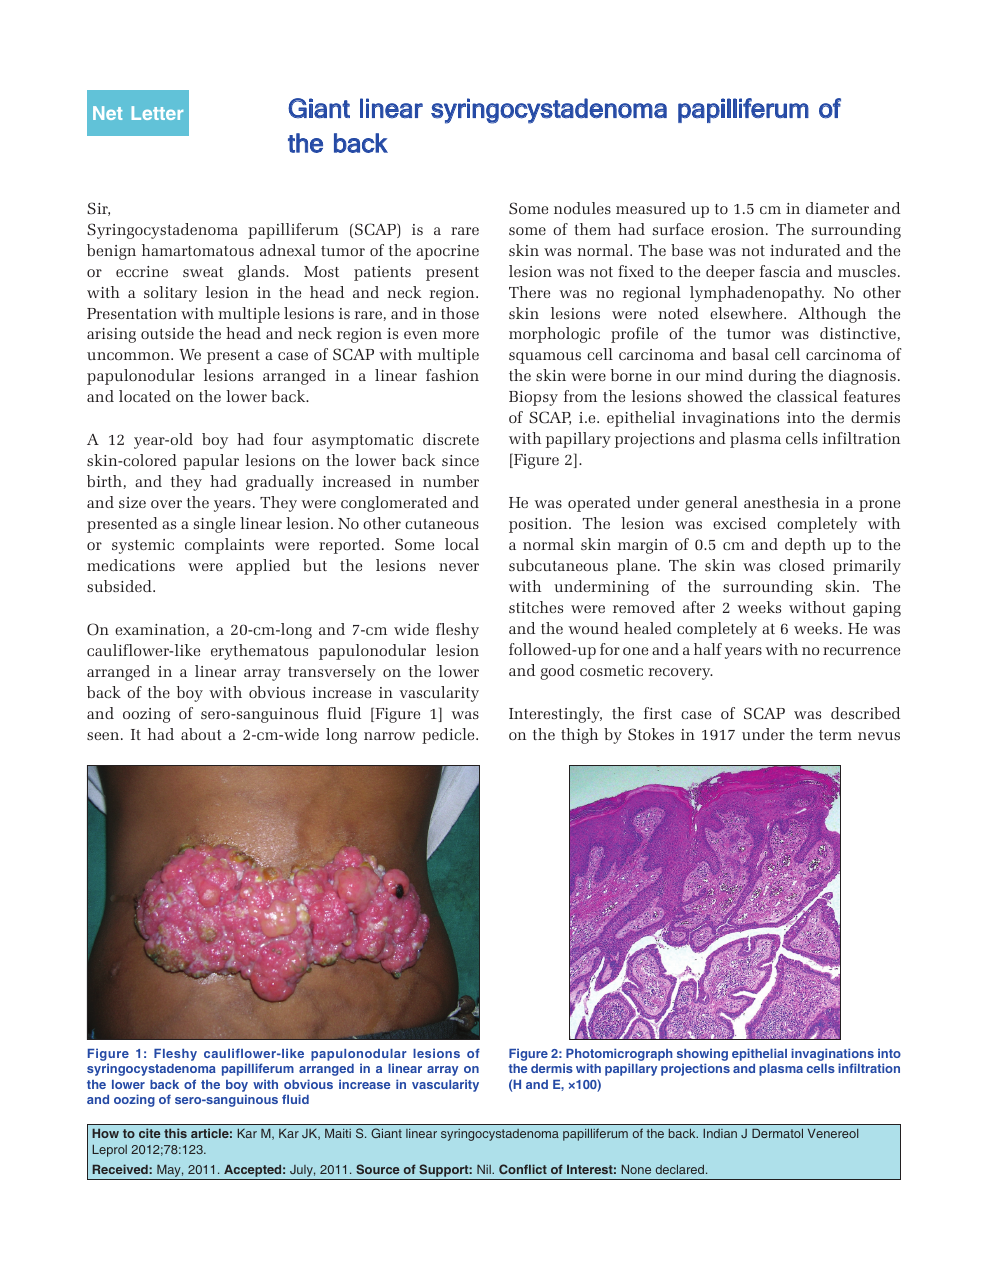 Giant Linear Syringocystadenoma Papilliferum Of The Back Topic Of Research Paper In Clinical Medicine Download Scholarly Article Pdf And Read For Free On Cyberleninka Open Science Hub